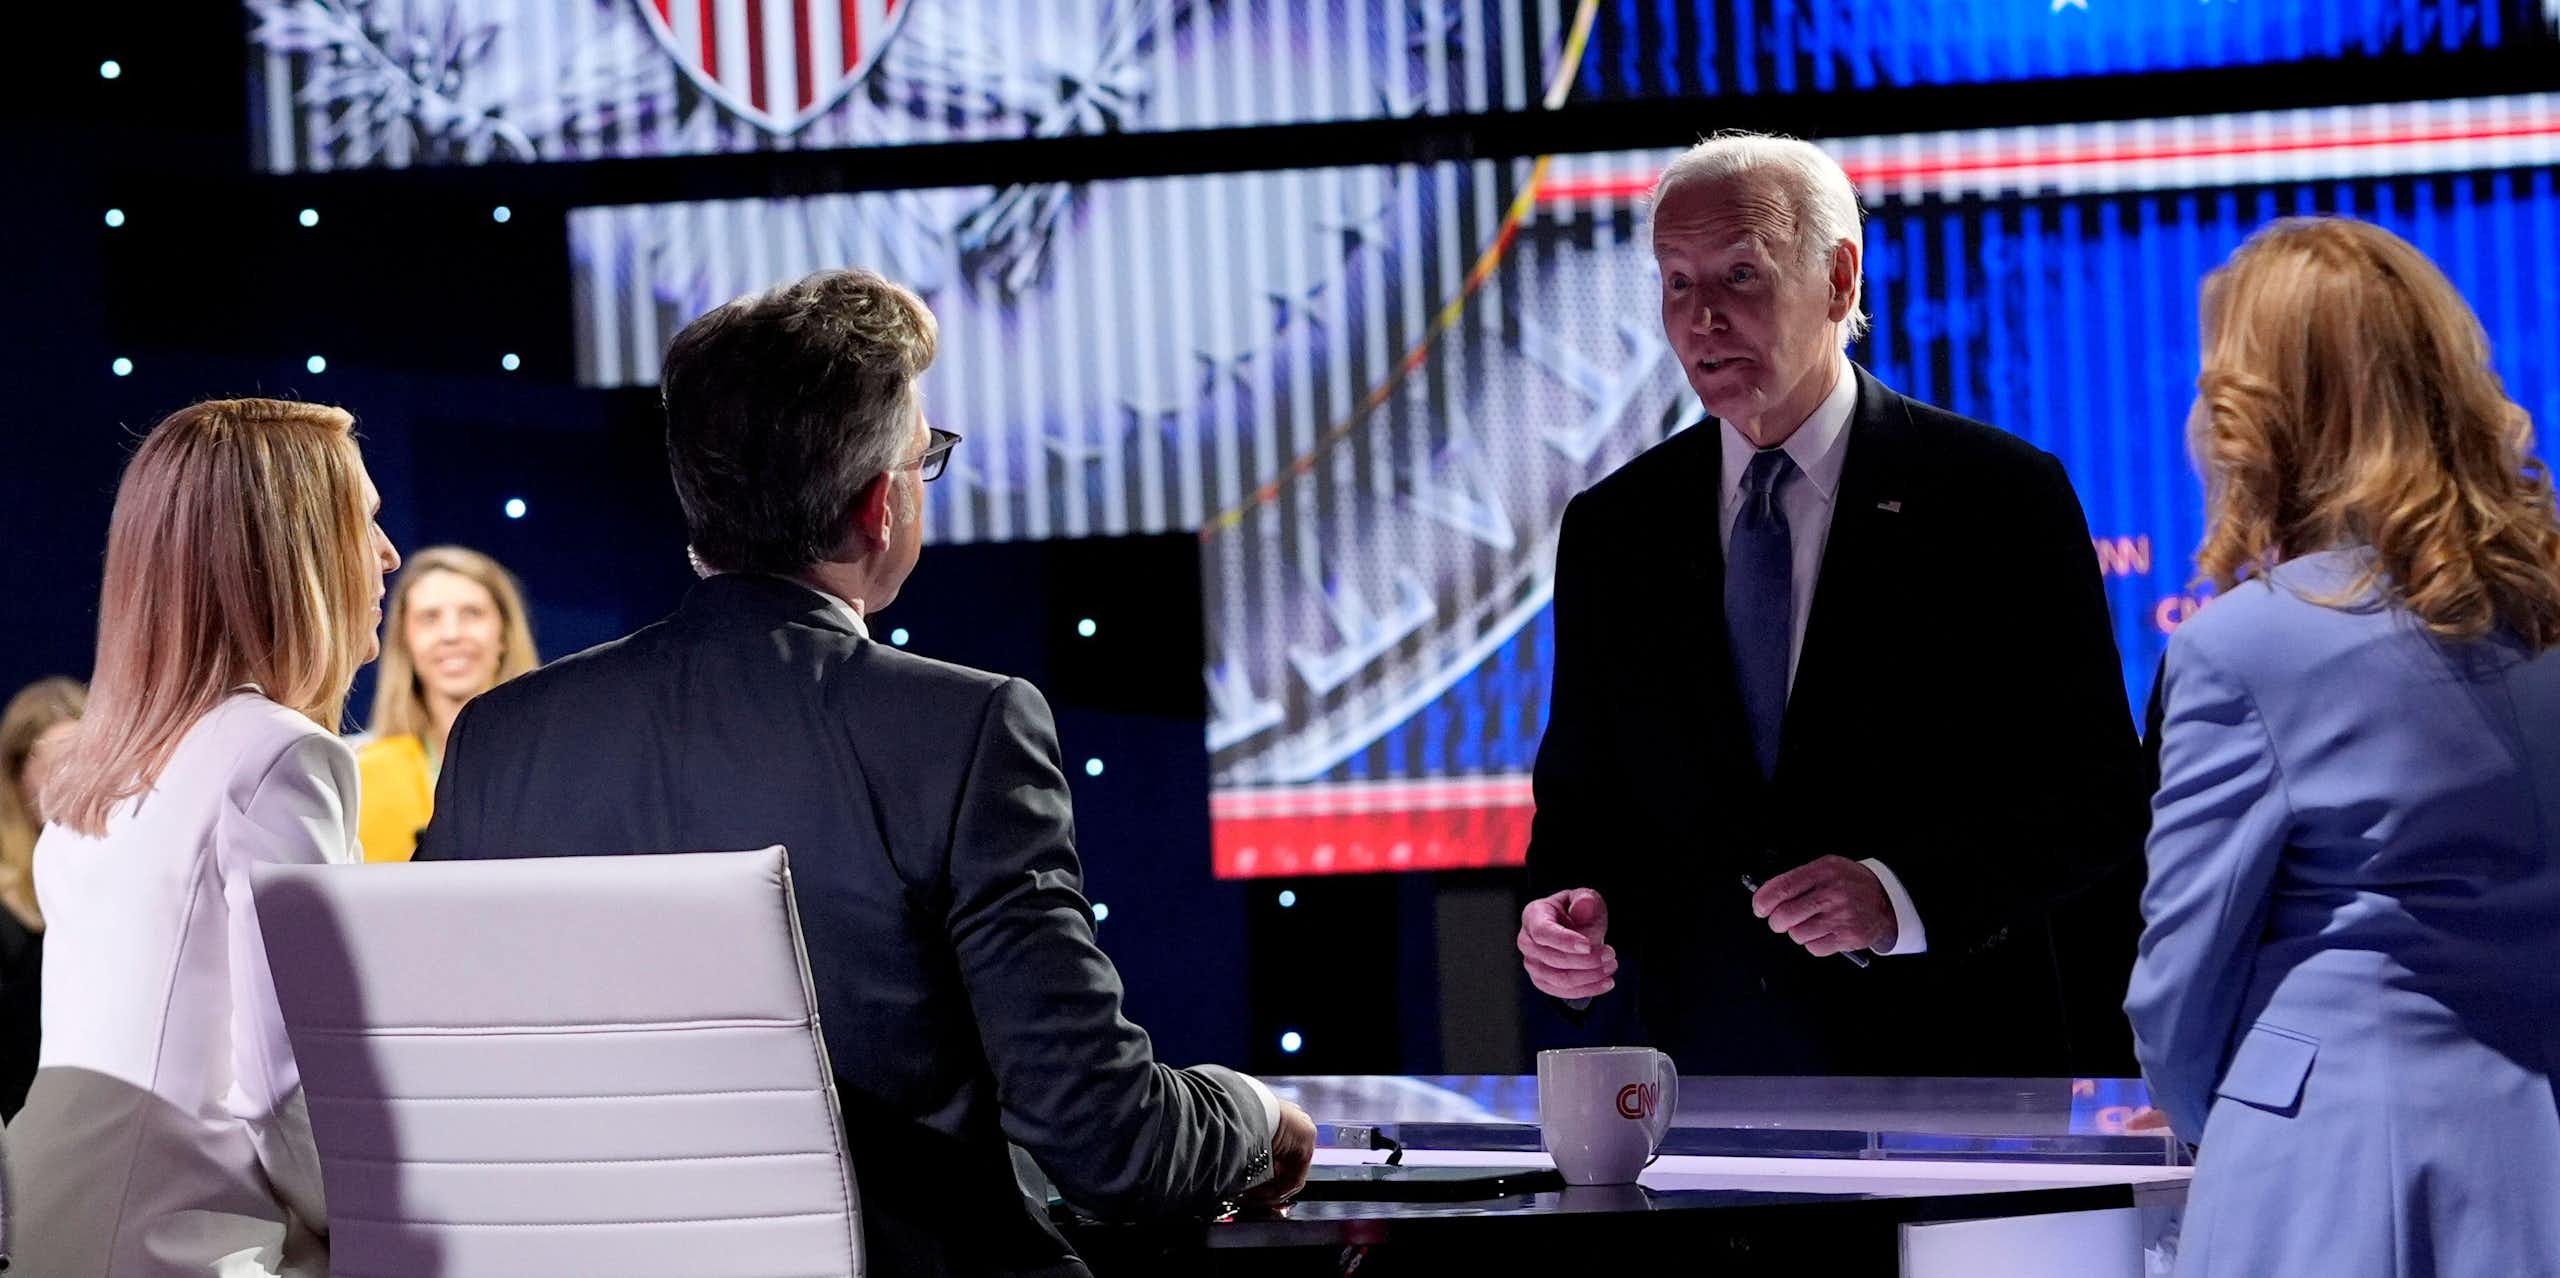 Joe Biden speaks to the host at the TV debate where he clashed with Donald Trump.